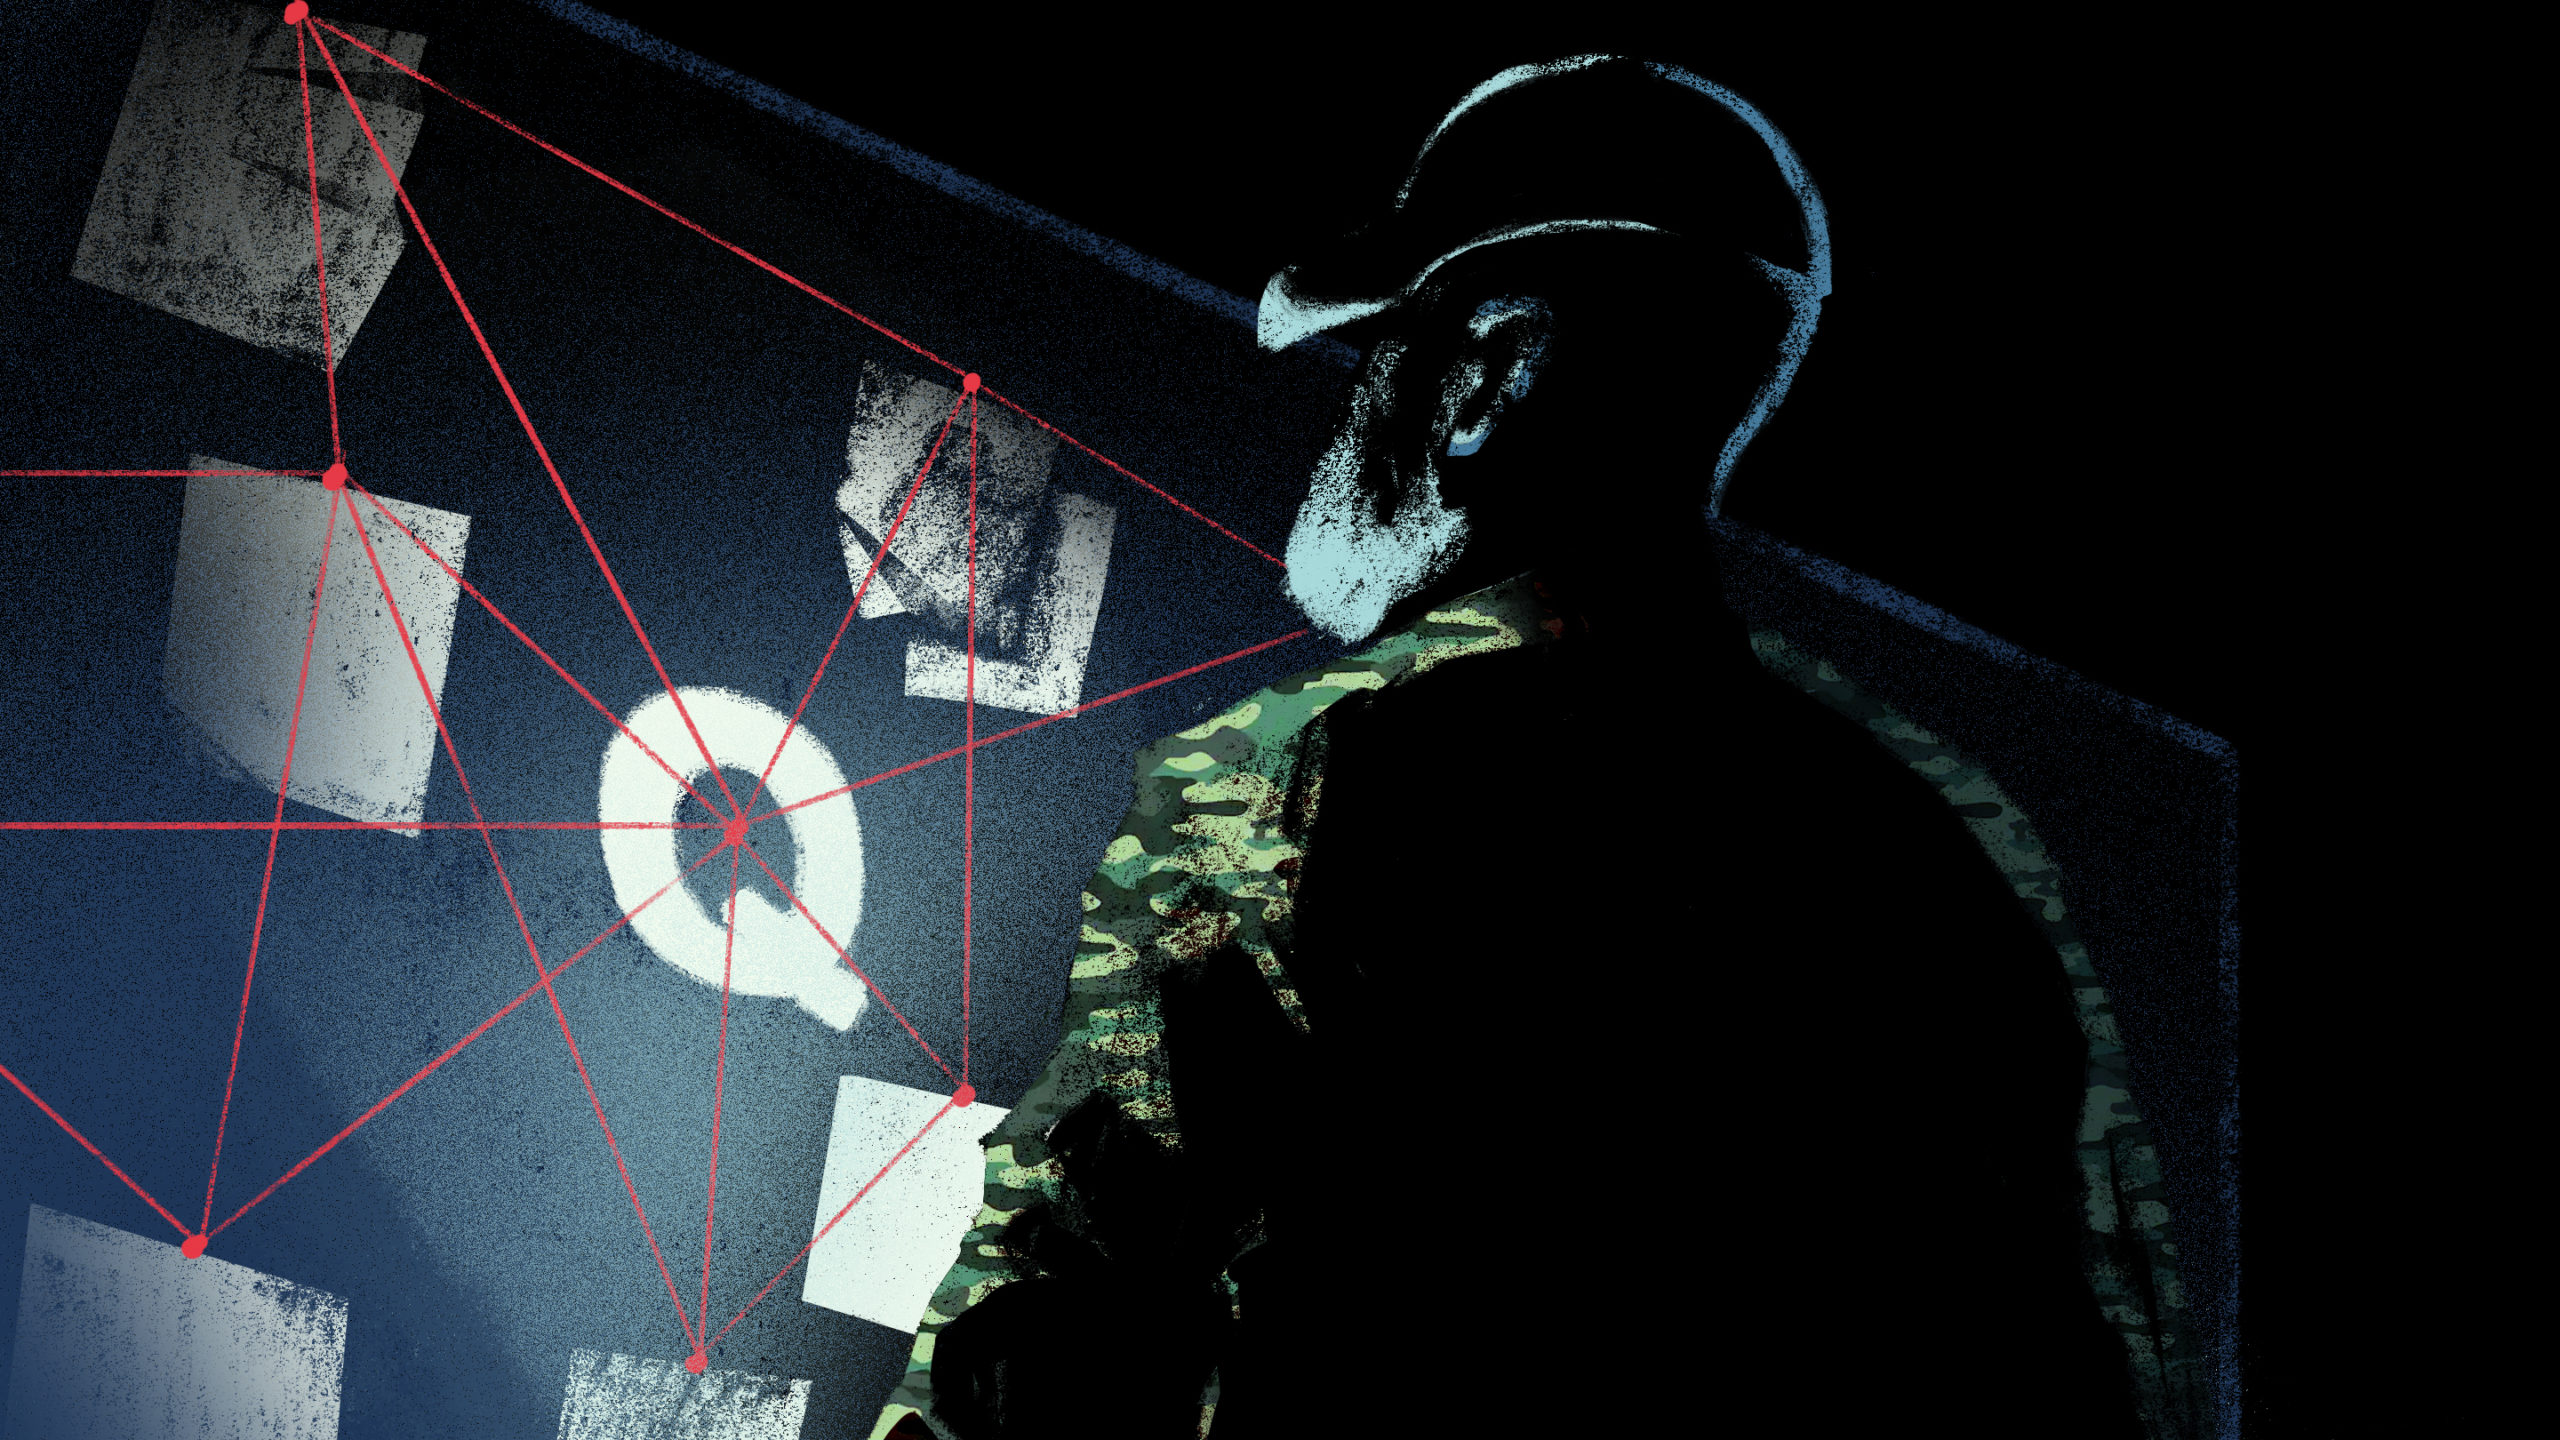 Illustration of a person in silhouette wearing army clothes observing a wall with papers and red lines, connecting to a big q letter in the center. creating a mysterious and investigative atmosphere.